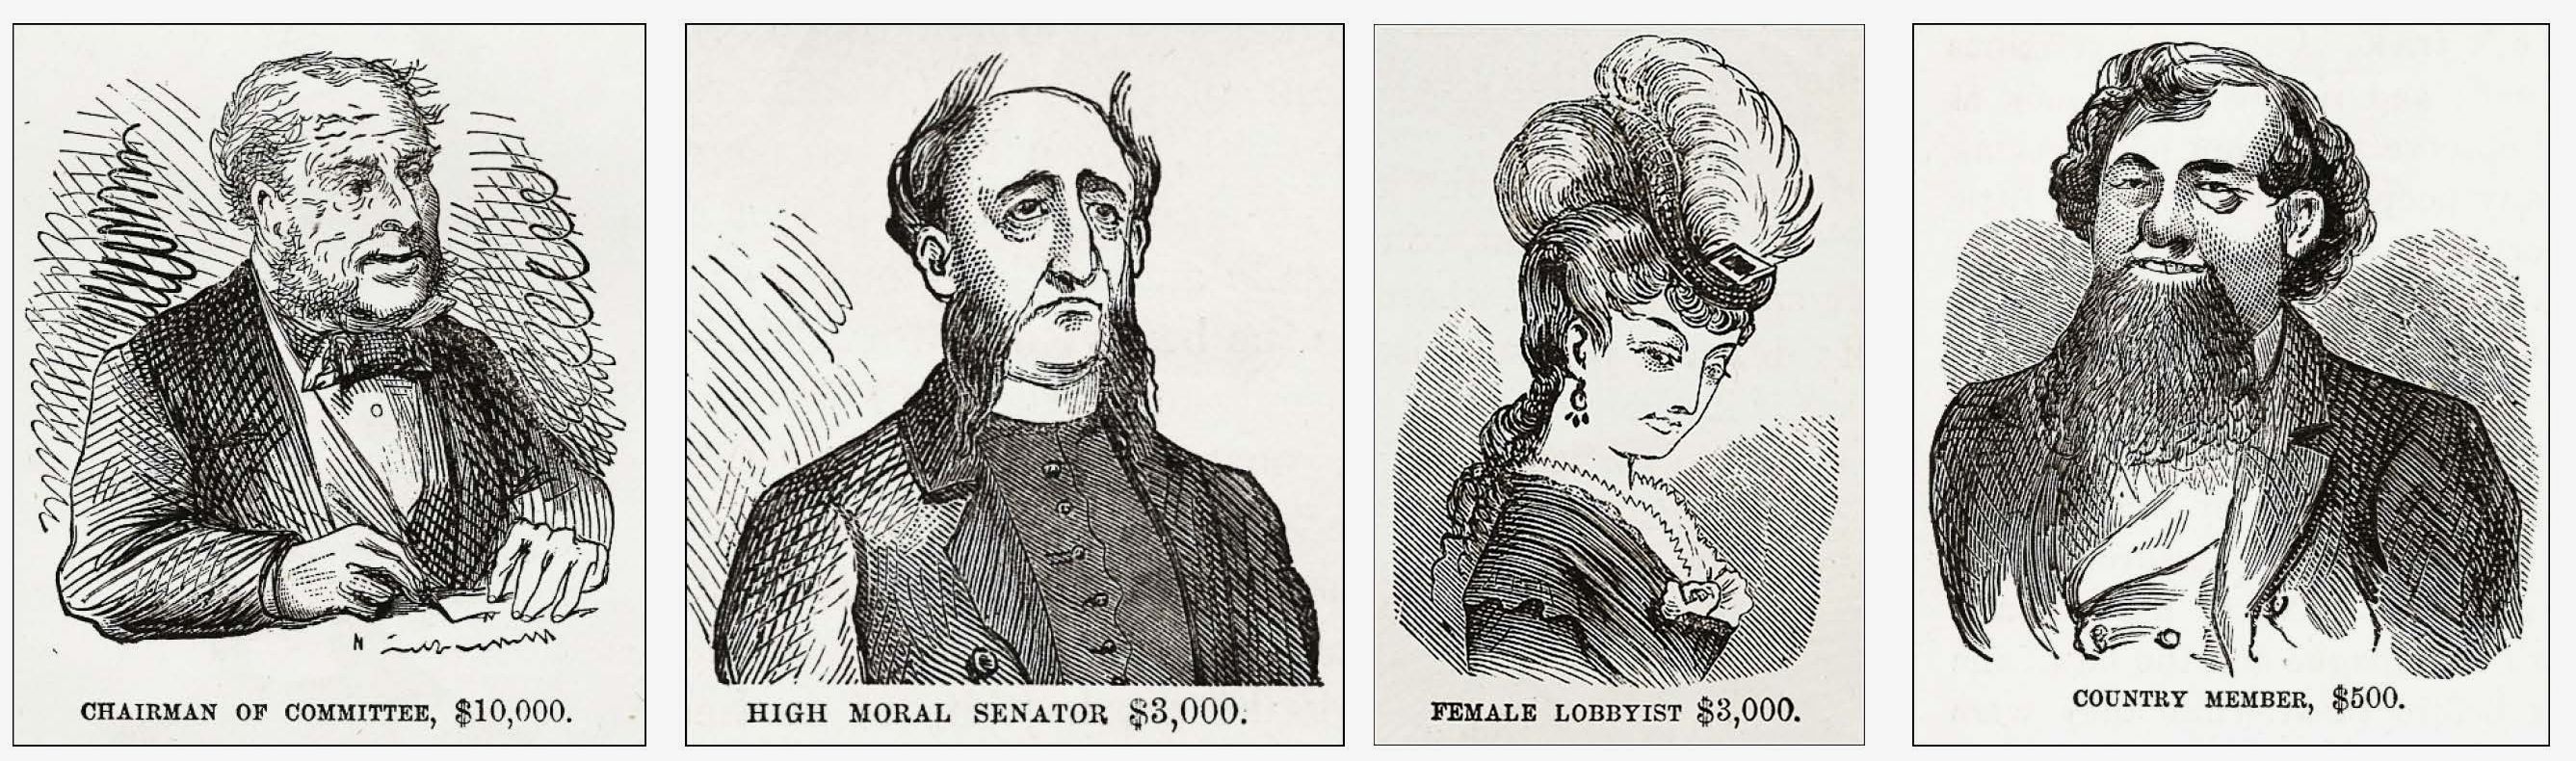 Twain's Gilded Age included cartoons of character types loosely based on figures in the scandal, from a committee chairman worth $10,000 to a country member of Congress worth only $500.